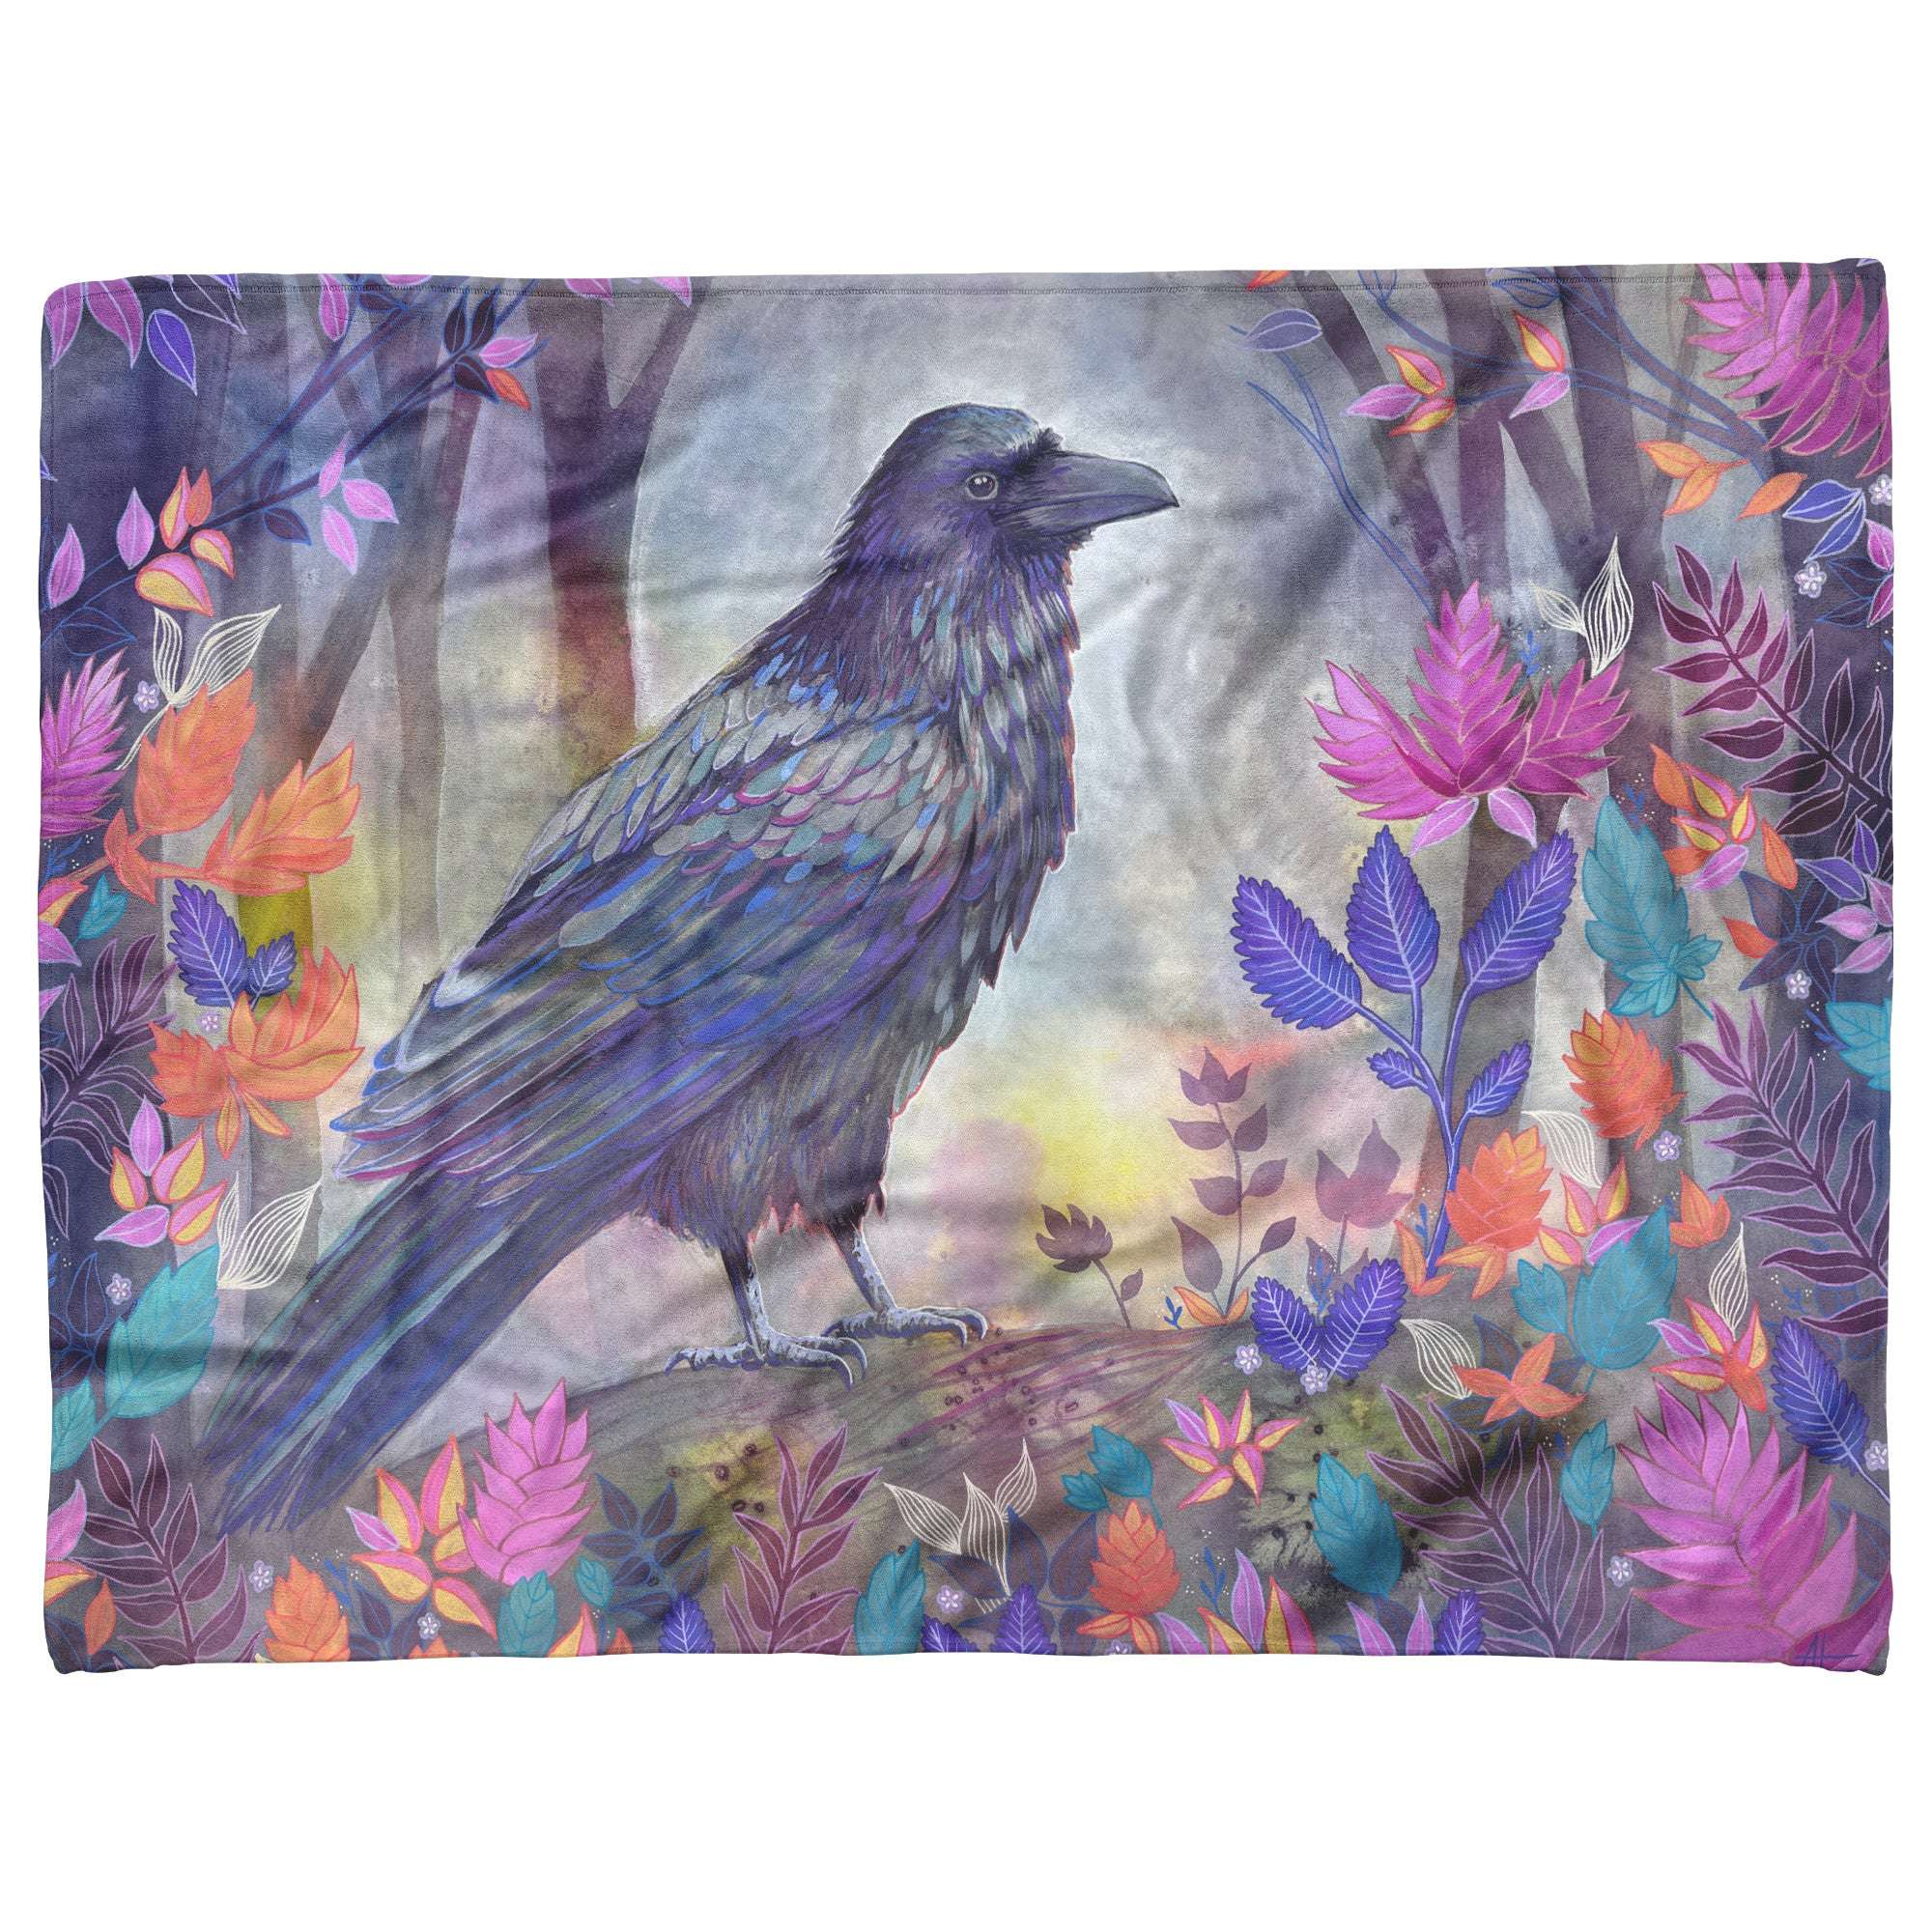 A vividly colored Raven Blanket stands amid a colorful, illustrative forest setting with bright, multicolored leaves and moody, misty background.